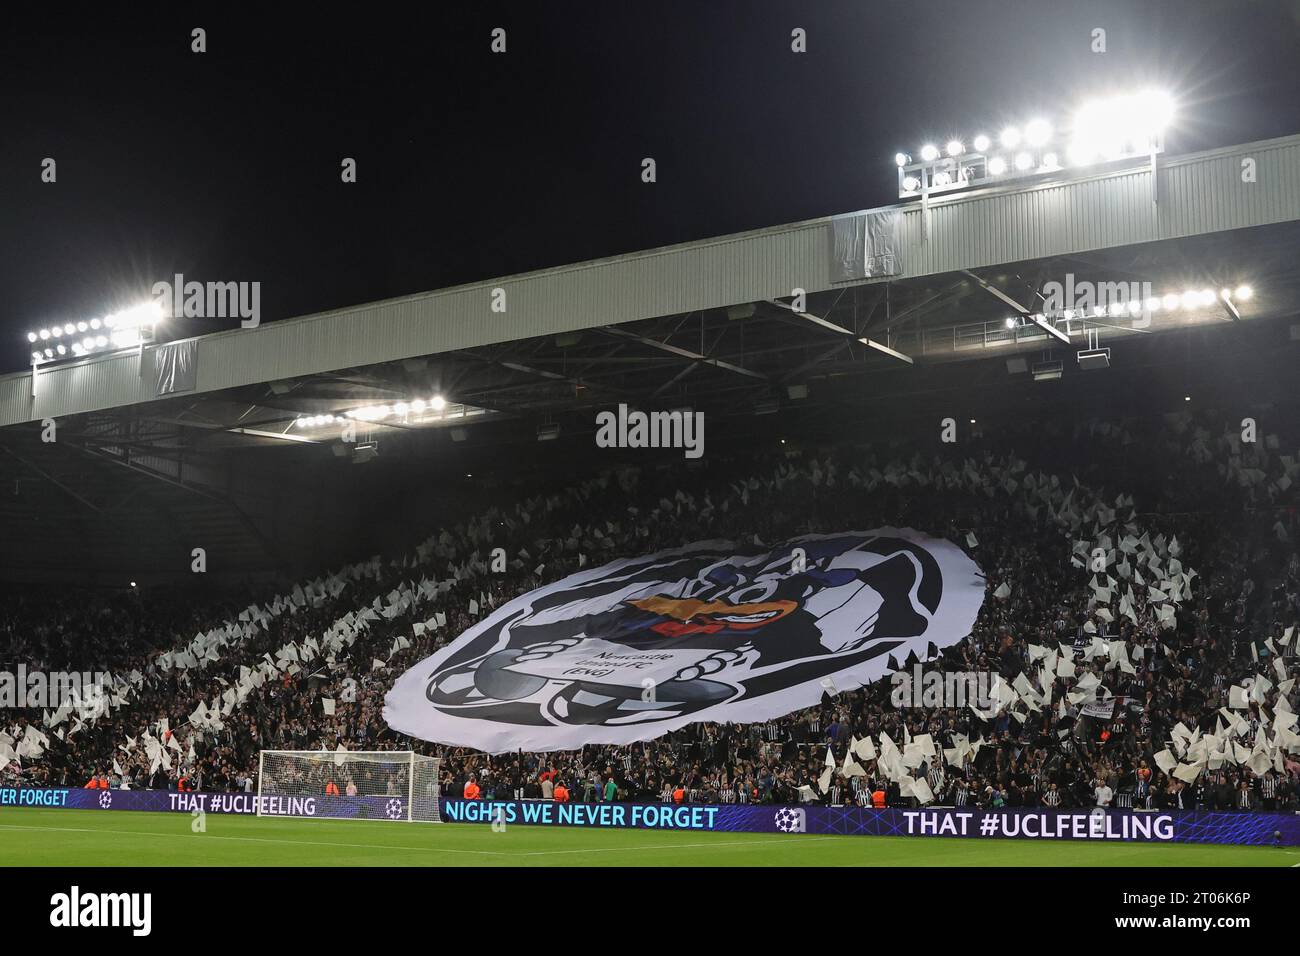 Newcastle United fans with a tifo display during the UEFA Champions League match Newcastle United vs Paris Saint-Germain at St. James's Park, Newcastle, United Kingdom, 4th October 2023  (Photo by Mark Cosgrove/News Images) Stock Photo